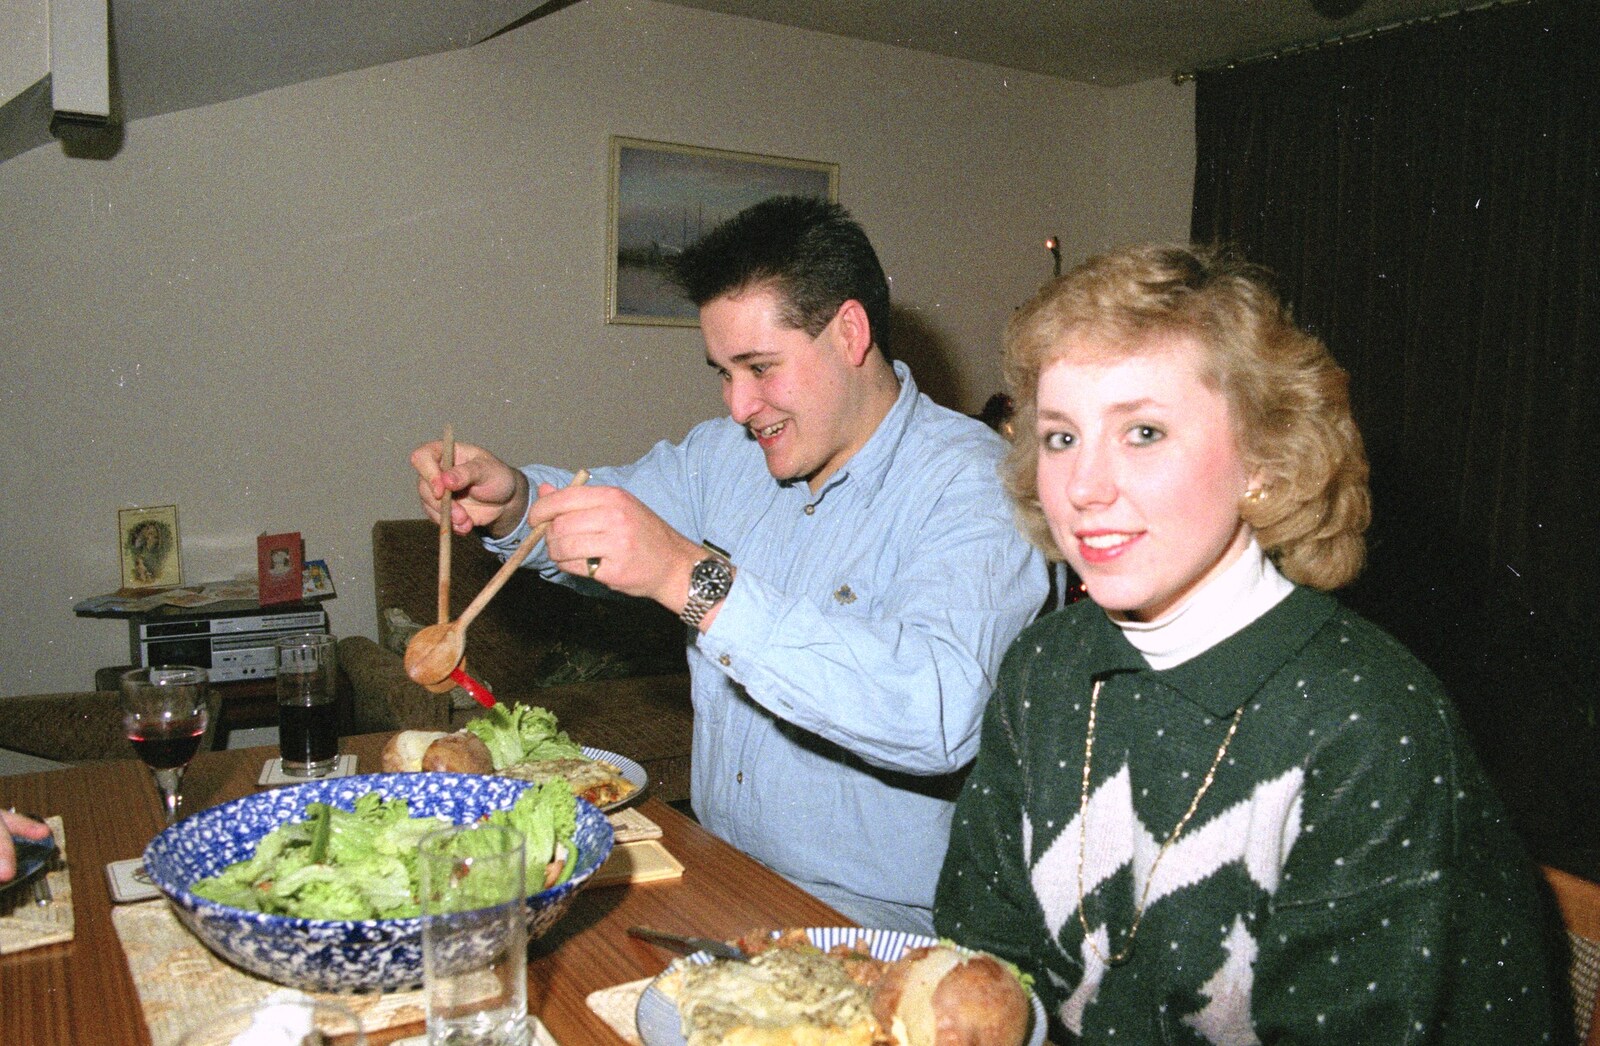 Barney scoops up some salad from Late Night, and Christmas with the Coxes, Needham, Norfolk - 25th December 1989